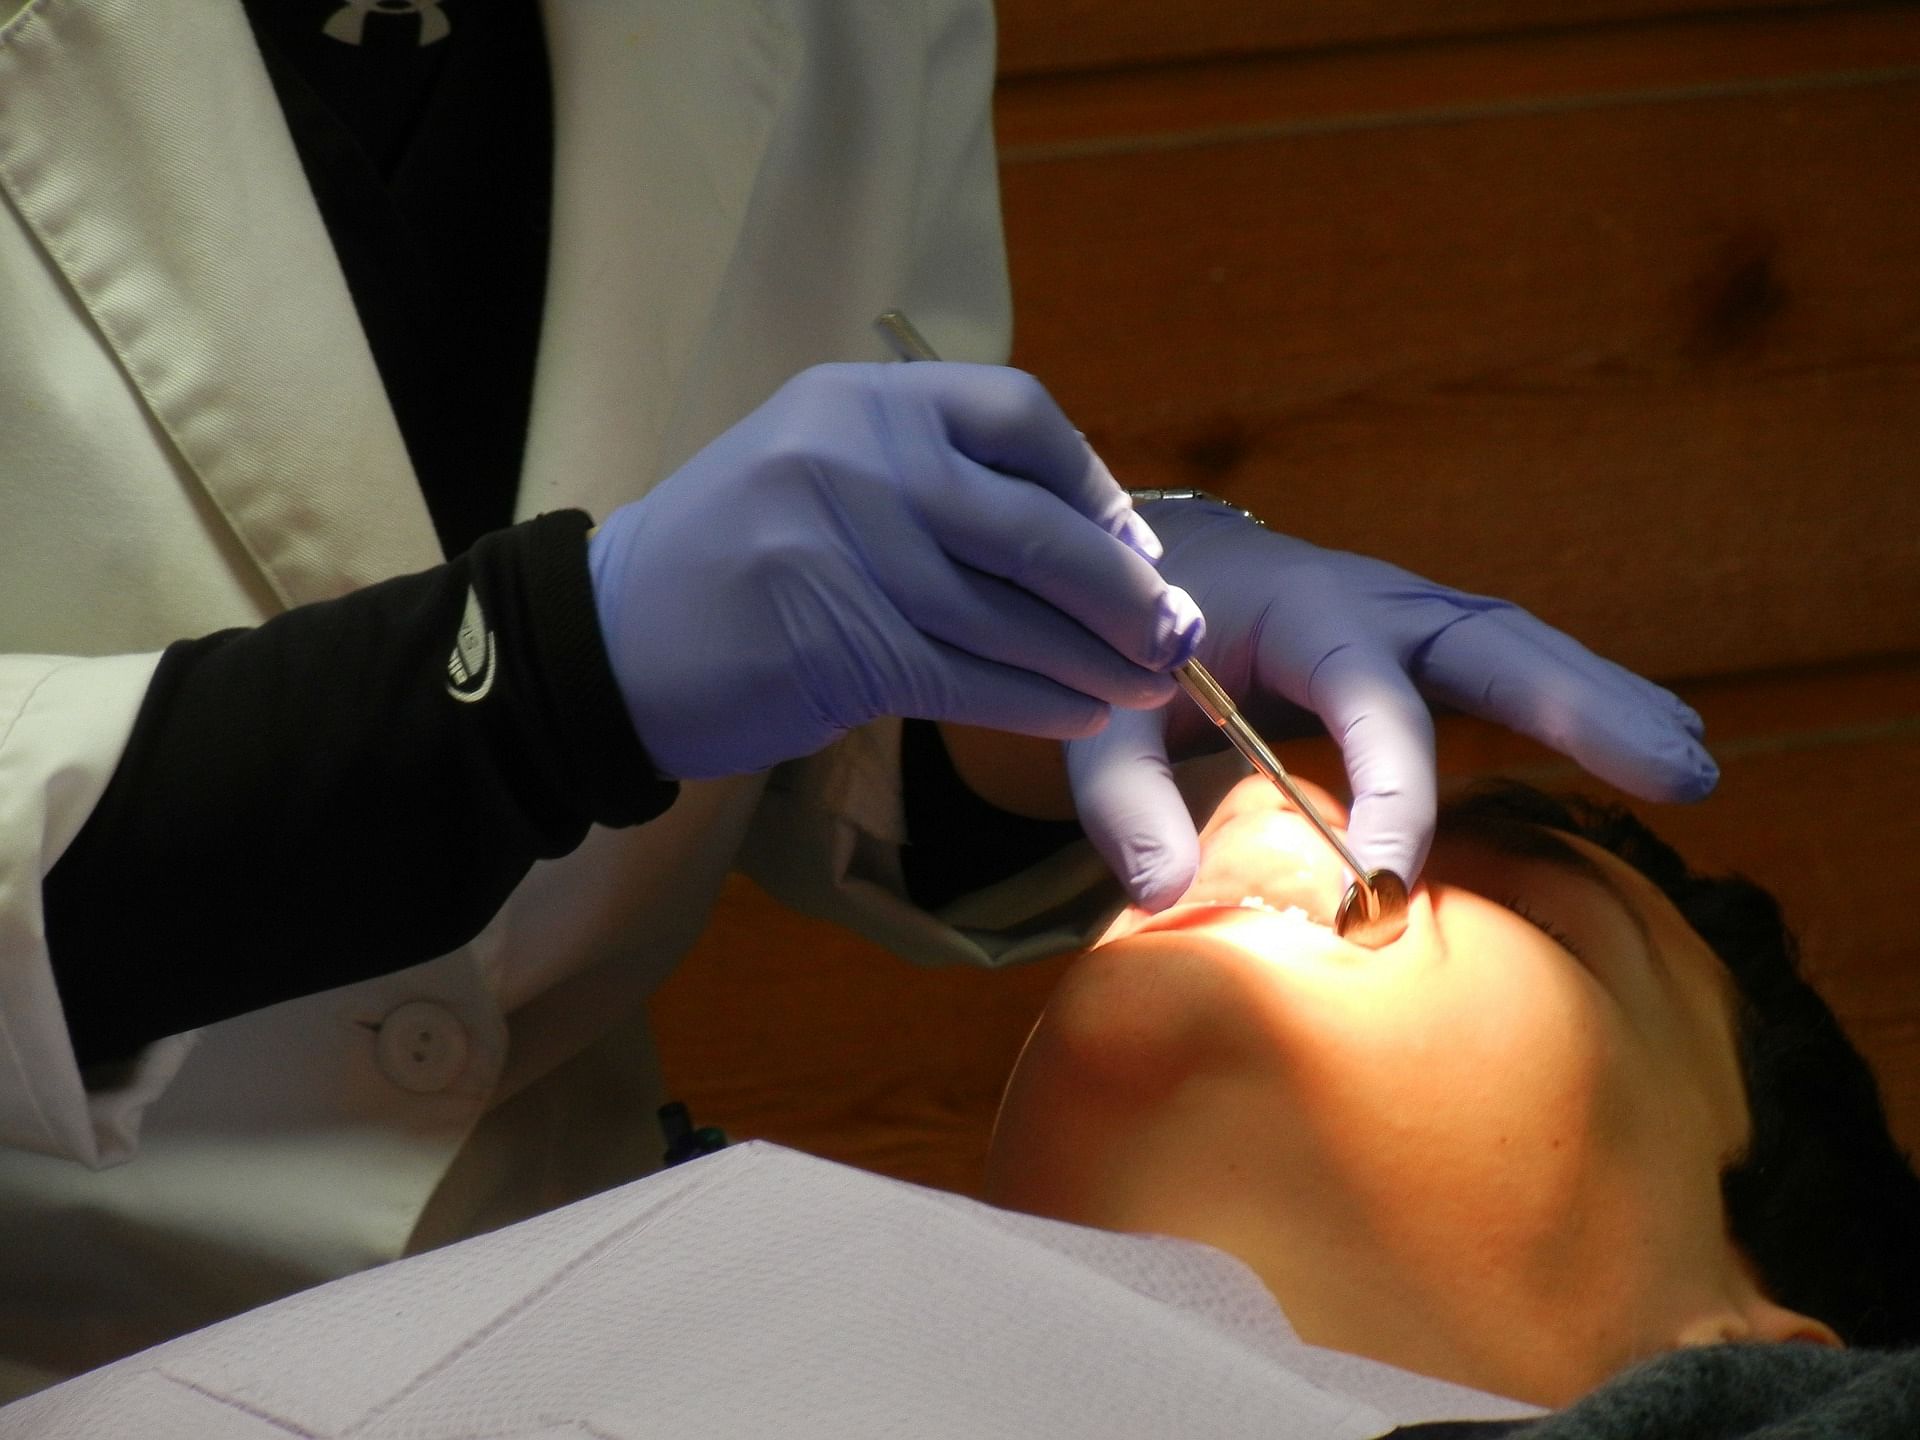 The root canal procedure had failed, which led to an infection. The victim is still in ICU. Representative image/Pixabay